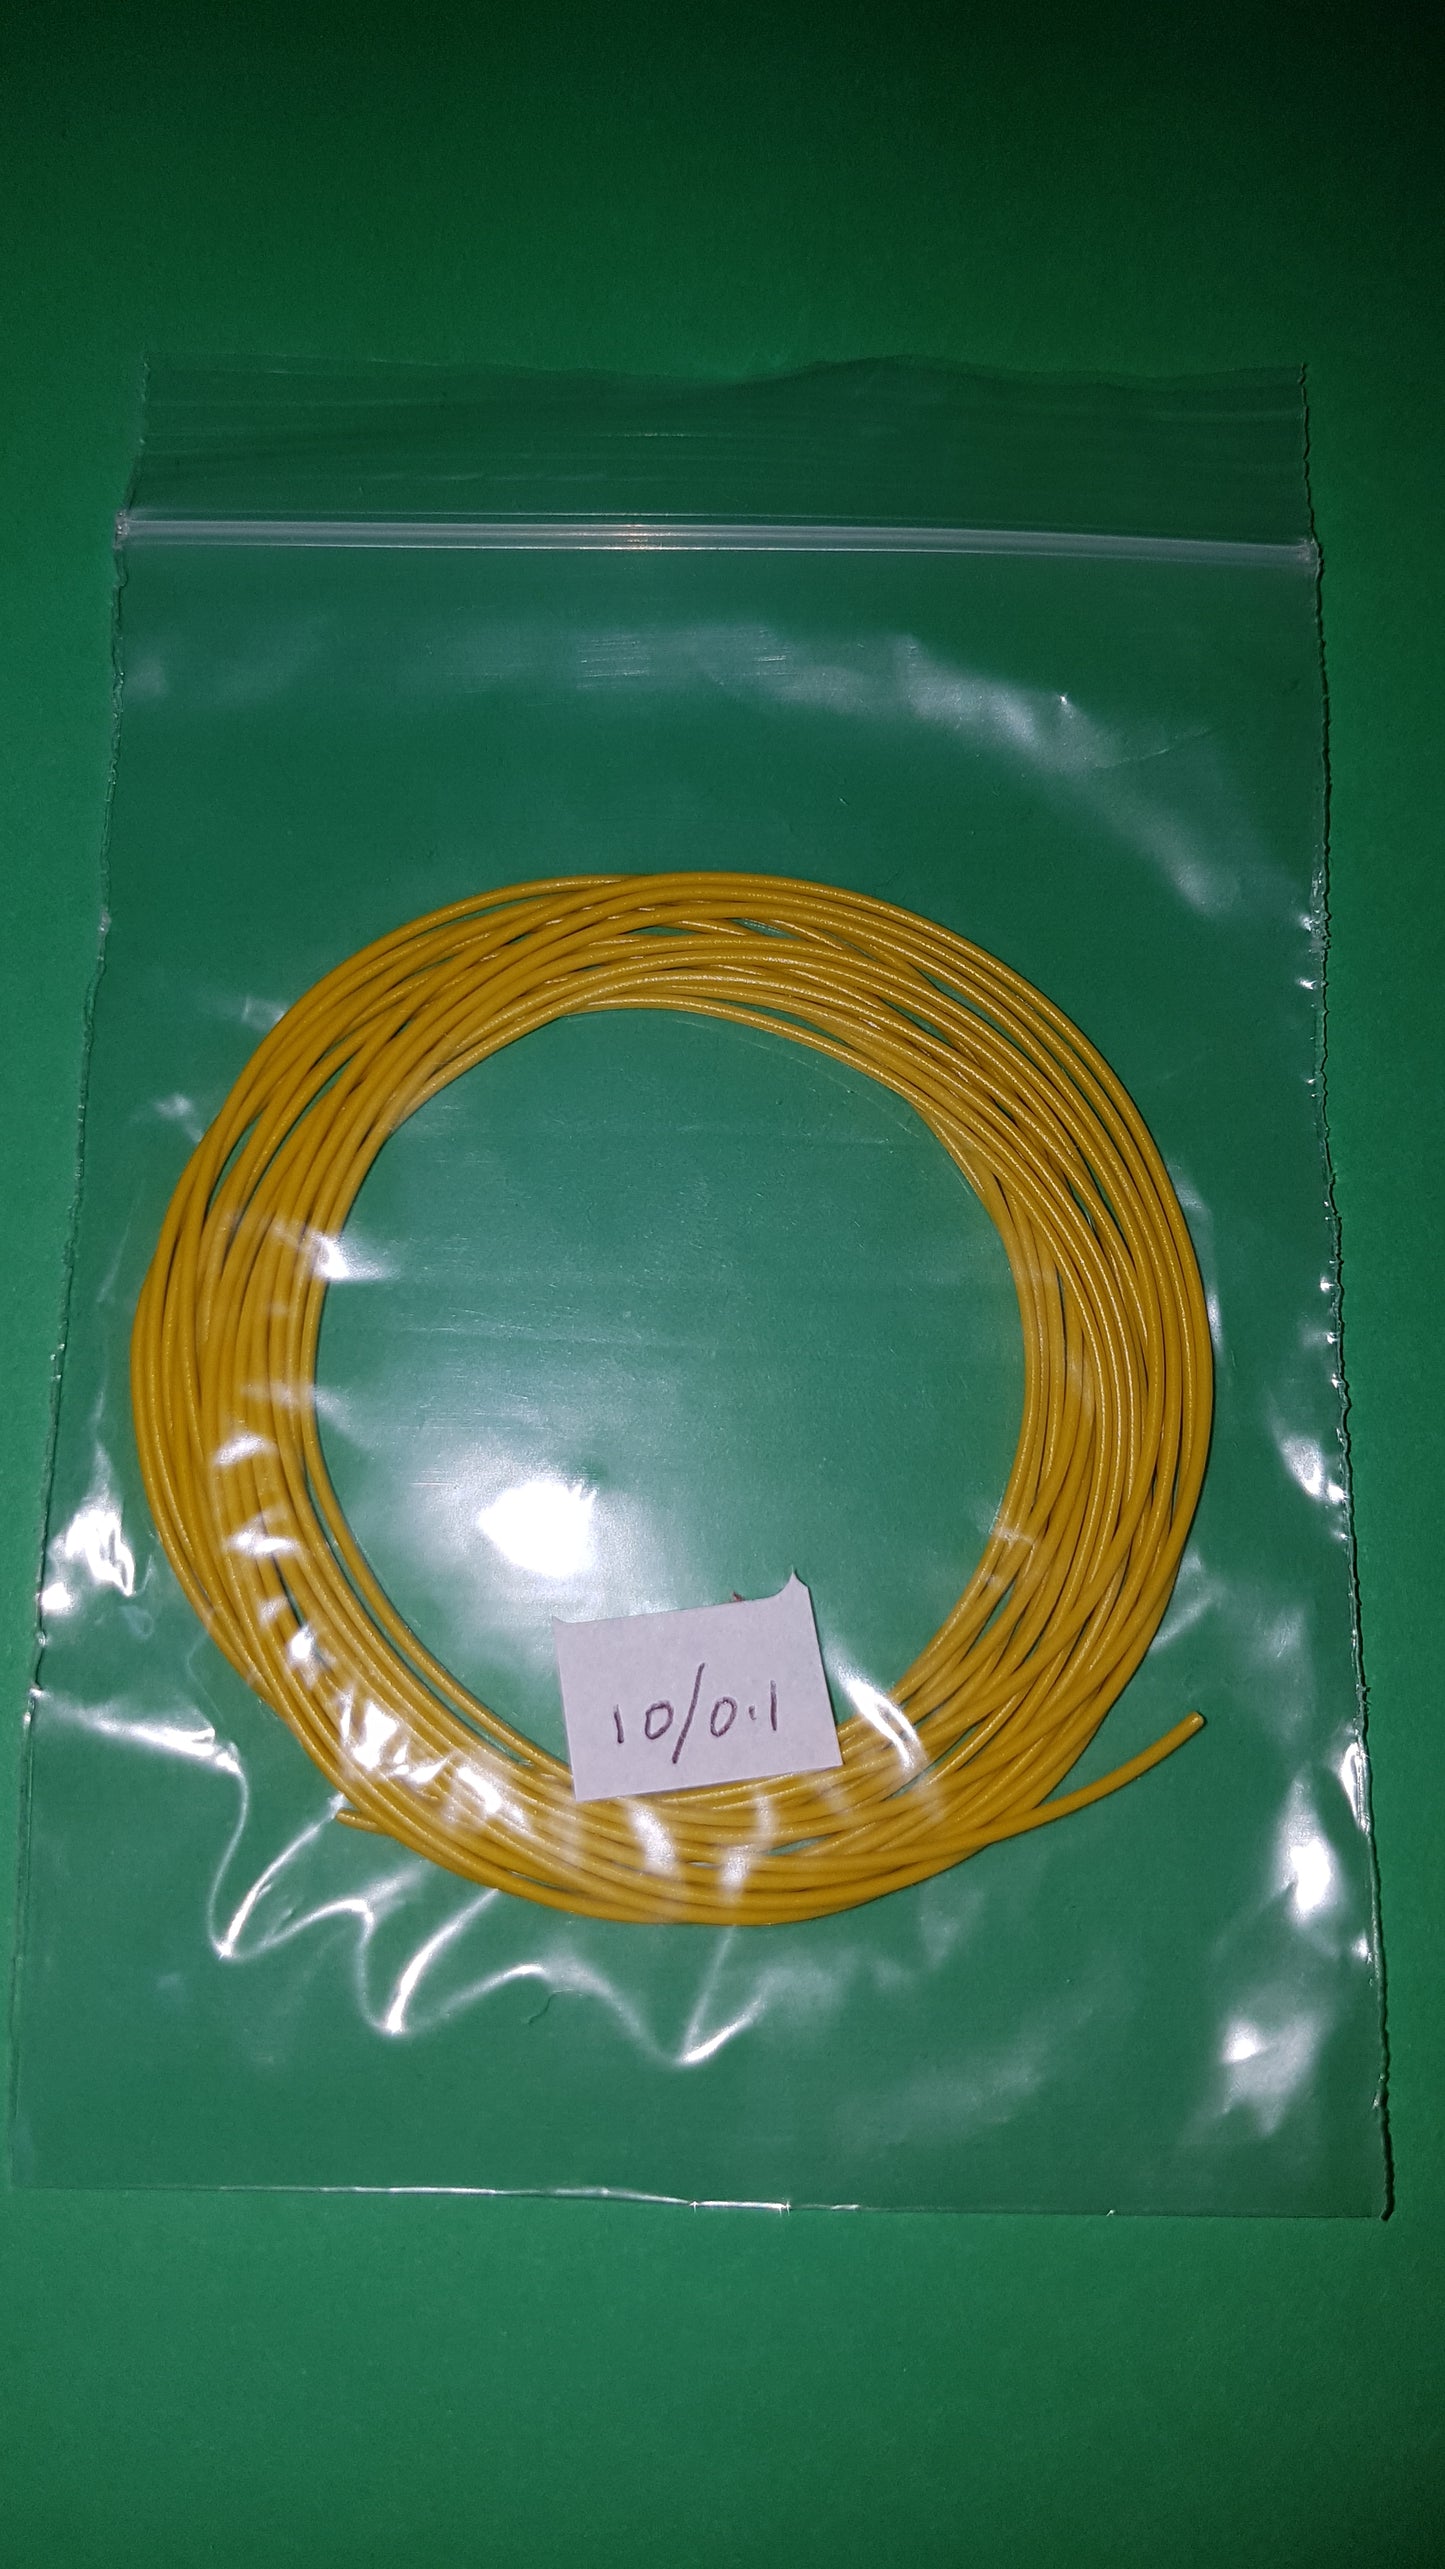 Electrical Cable - Model Railways - Multi Colours - 10 Strands @ 0.1mm - 3M